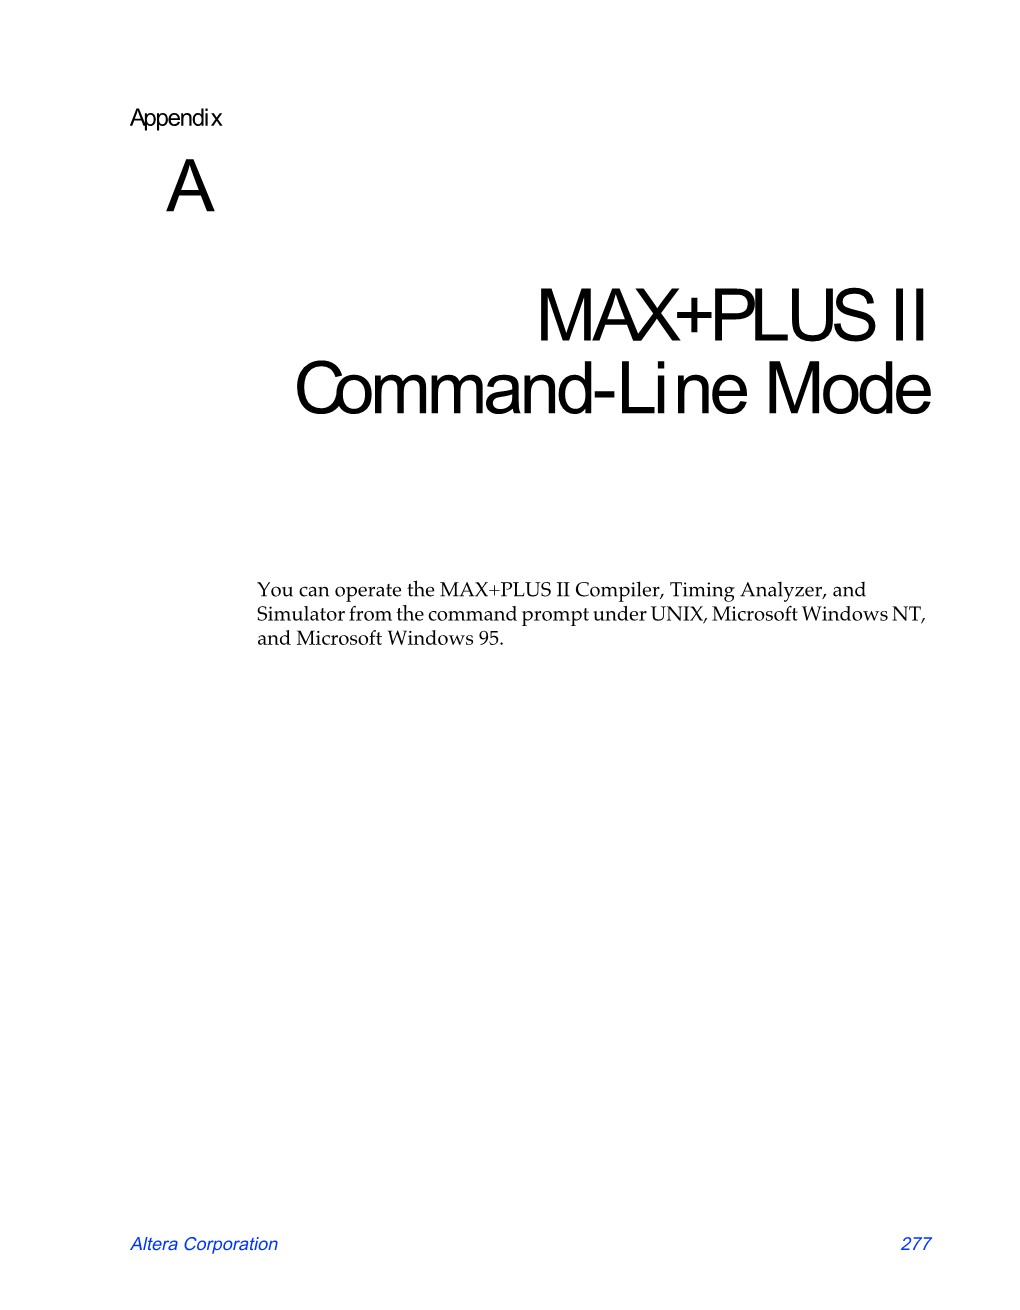 MAX+PLUS II Getting Started, Appendix A-C, Glossary